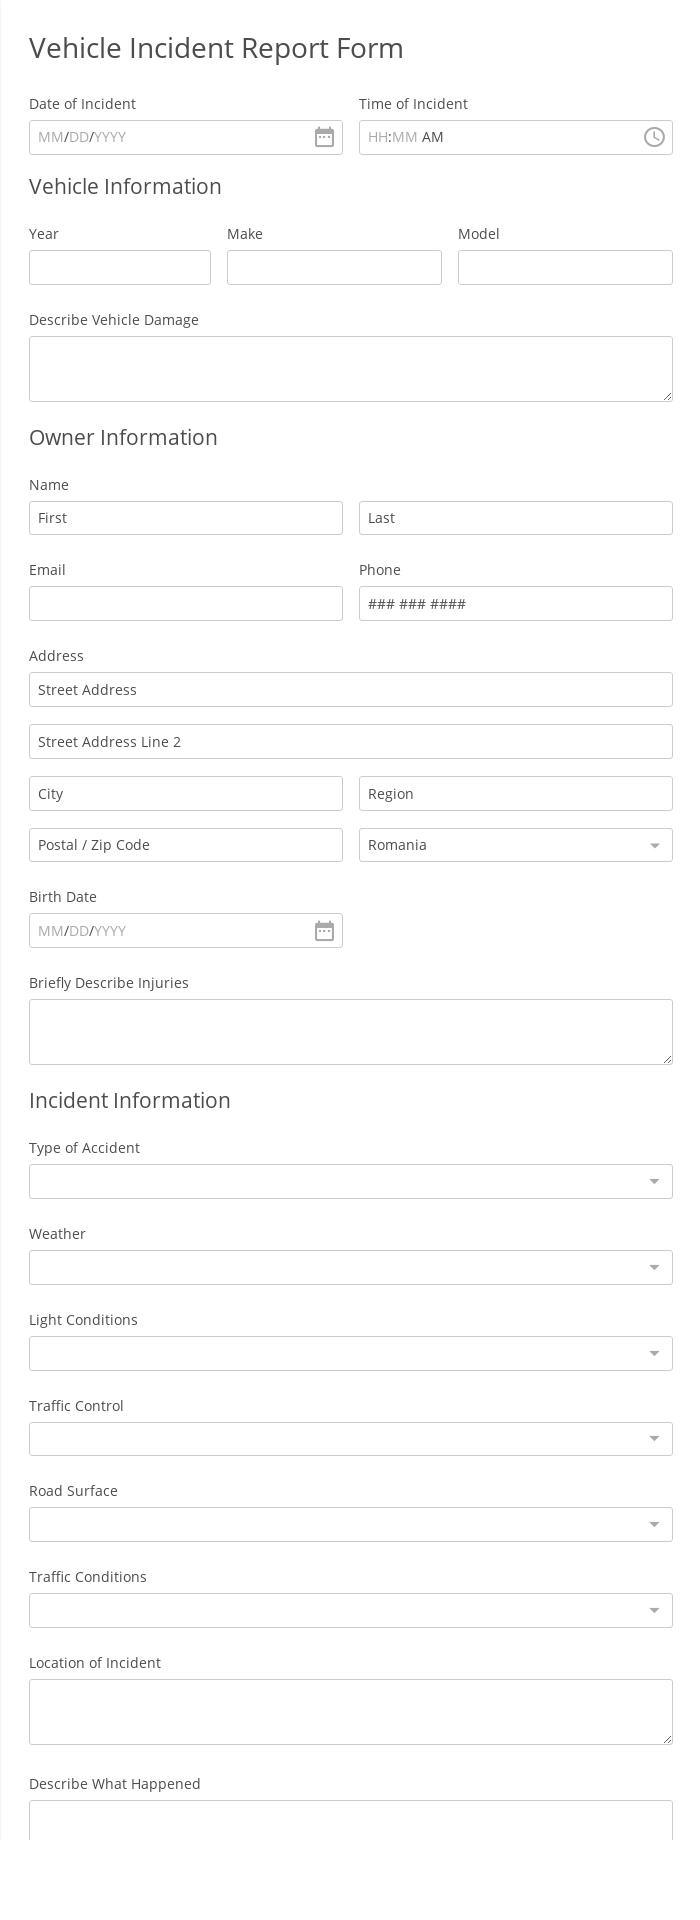 Vehicle Incident Report Form Template  22 Form Builder Throughout Employee Incident Report Templates